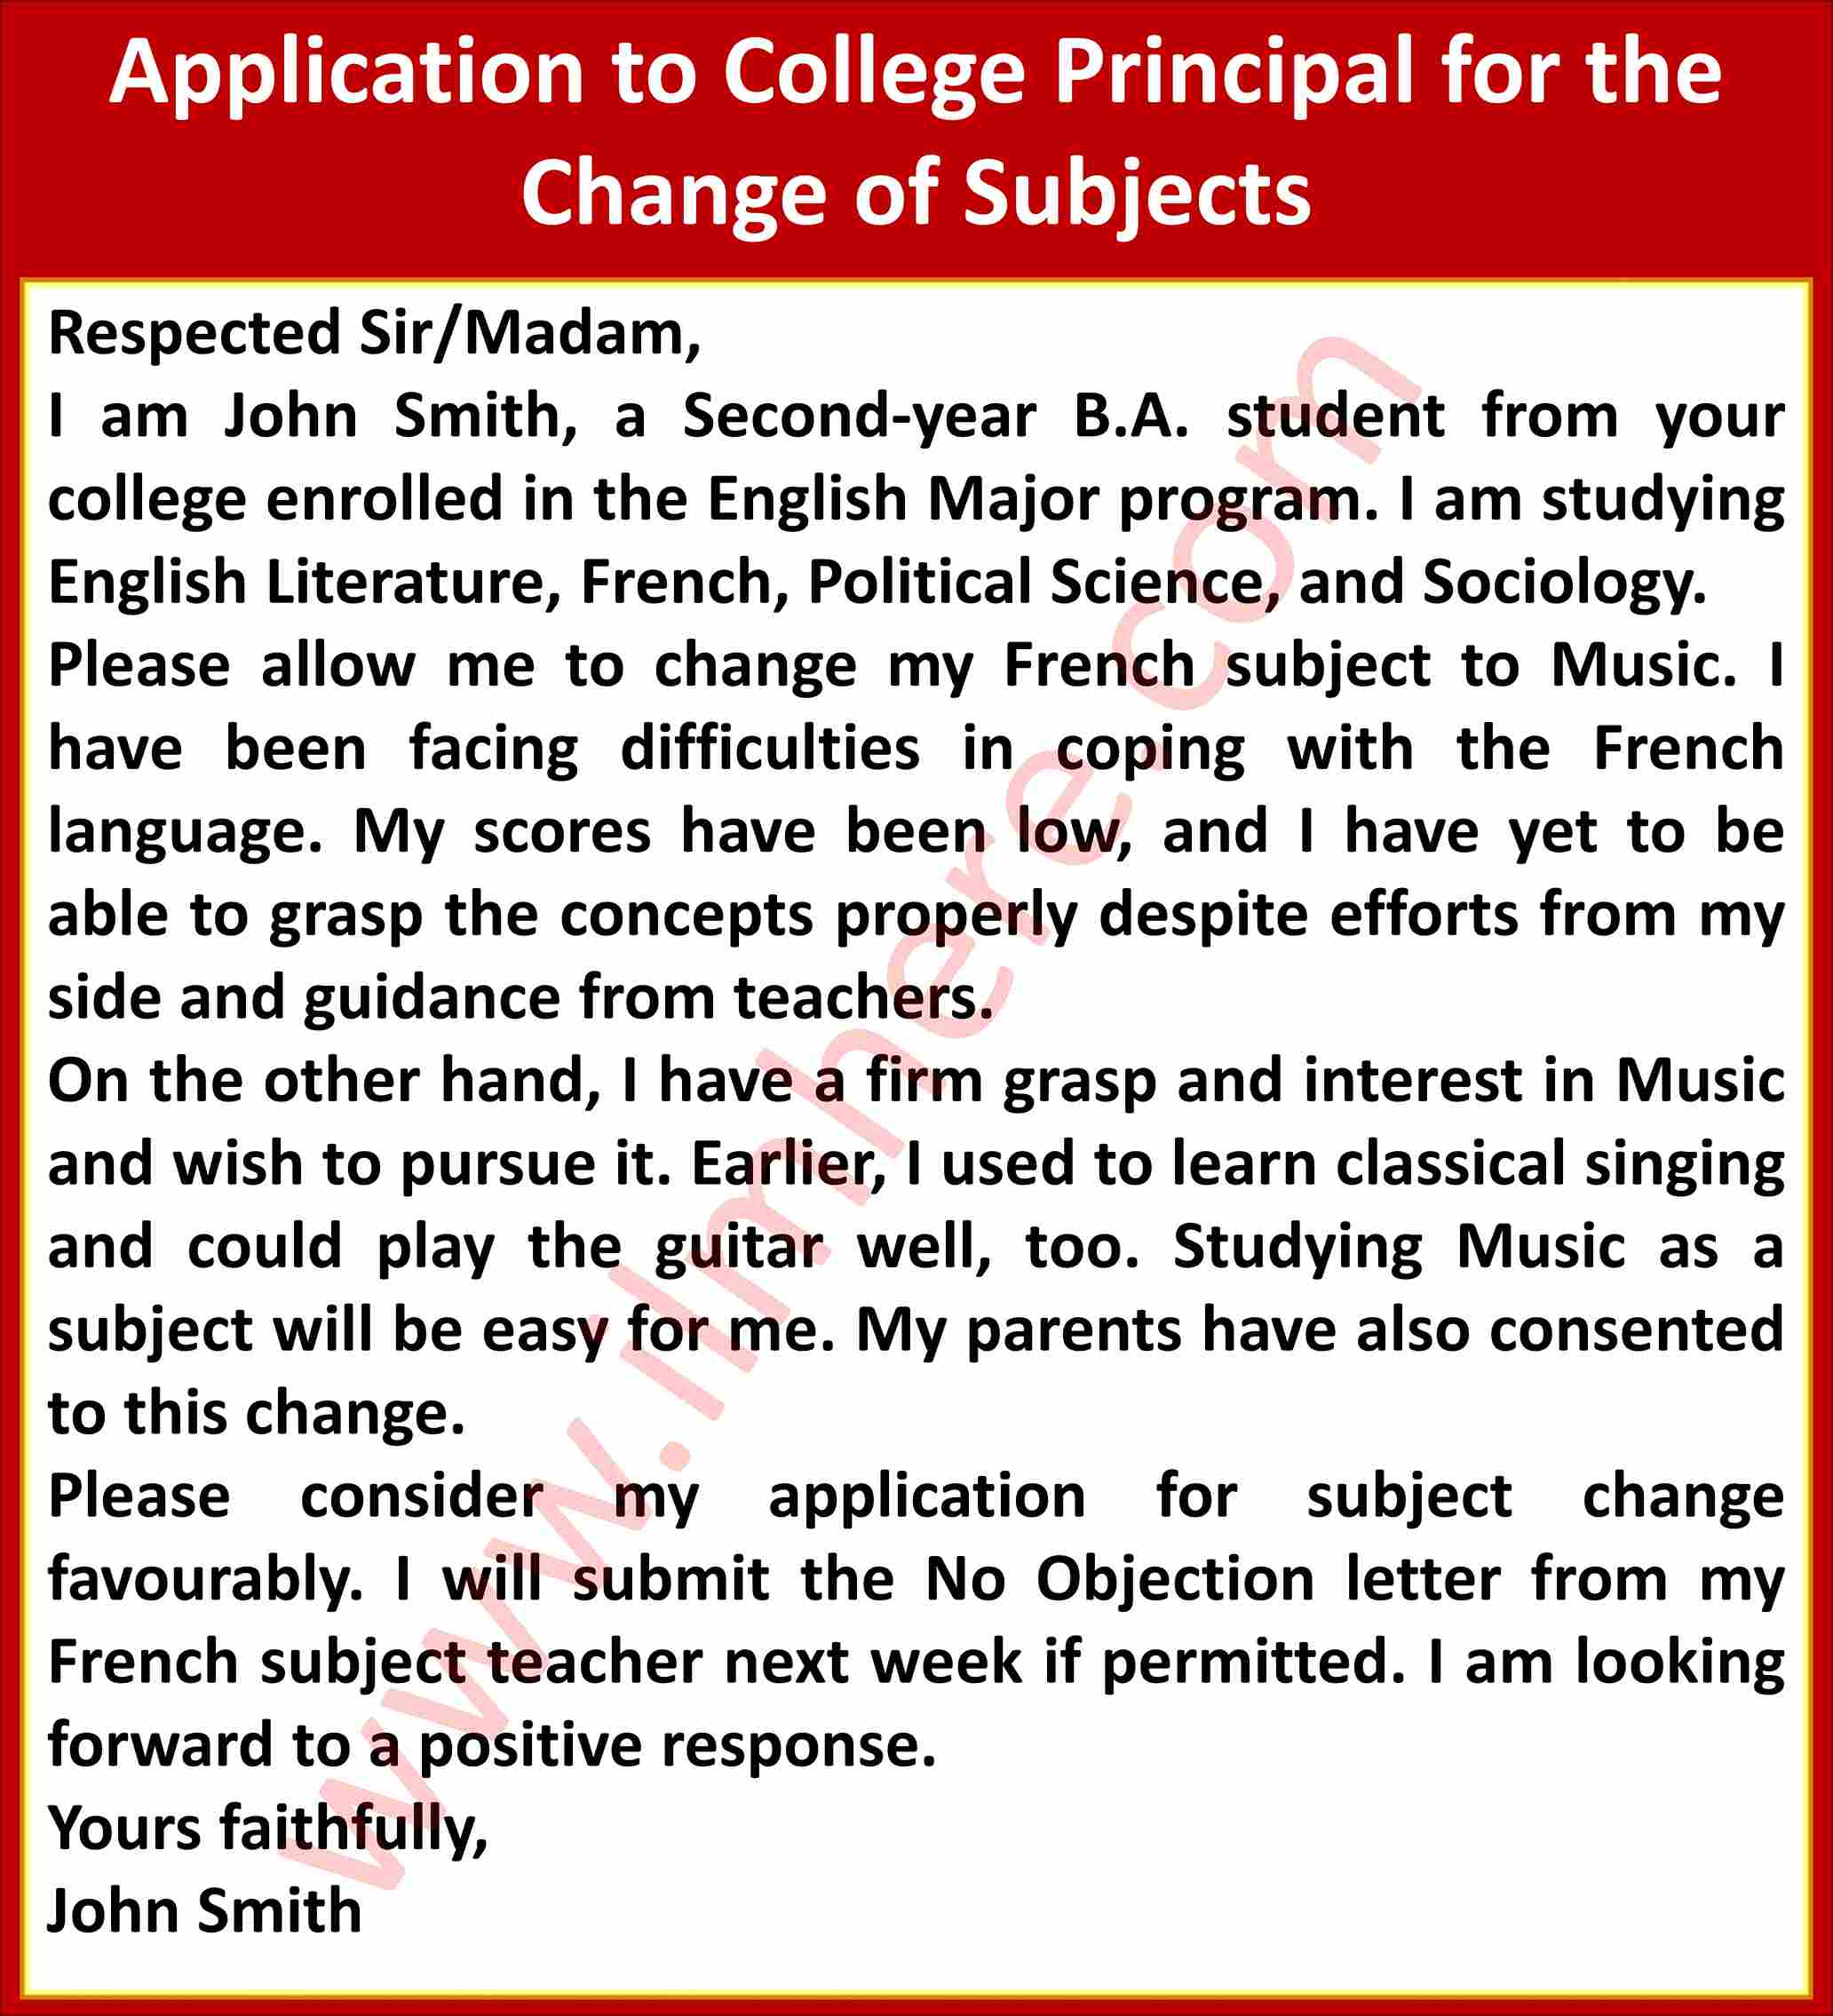 Application to College Principal for the Change of Subjects